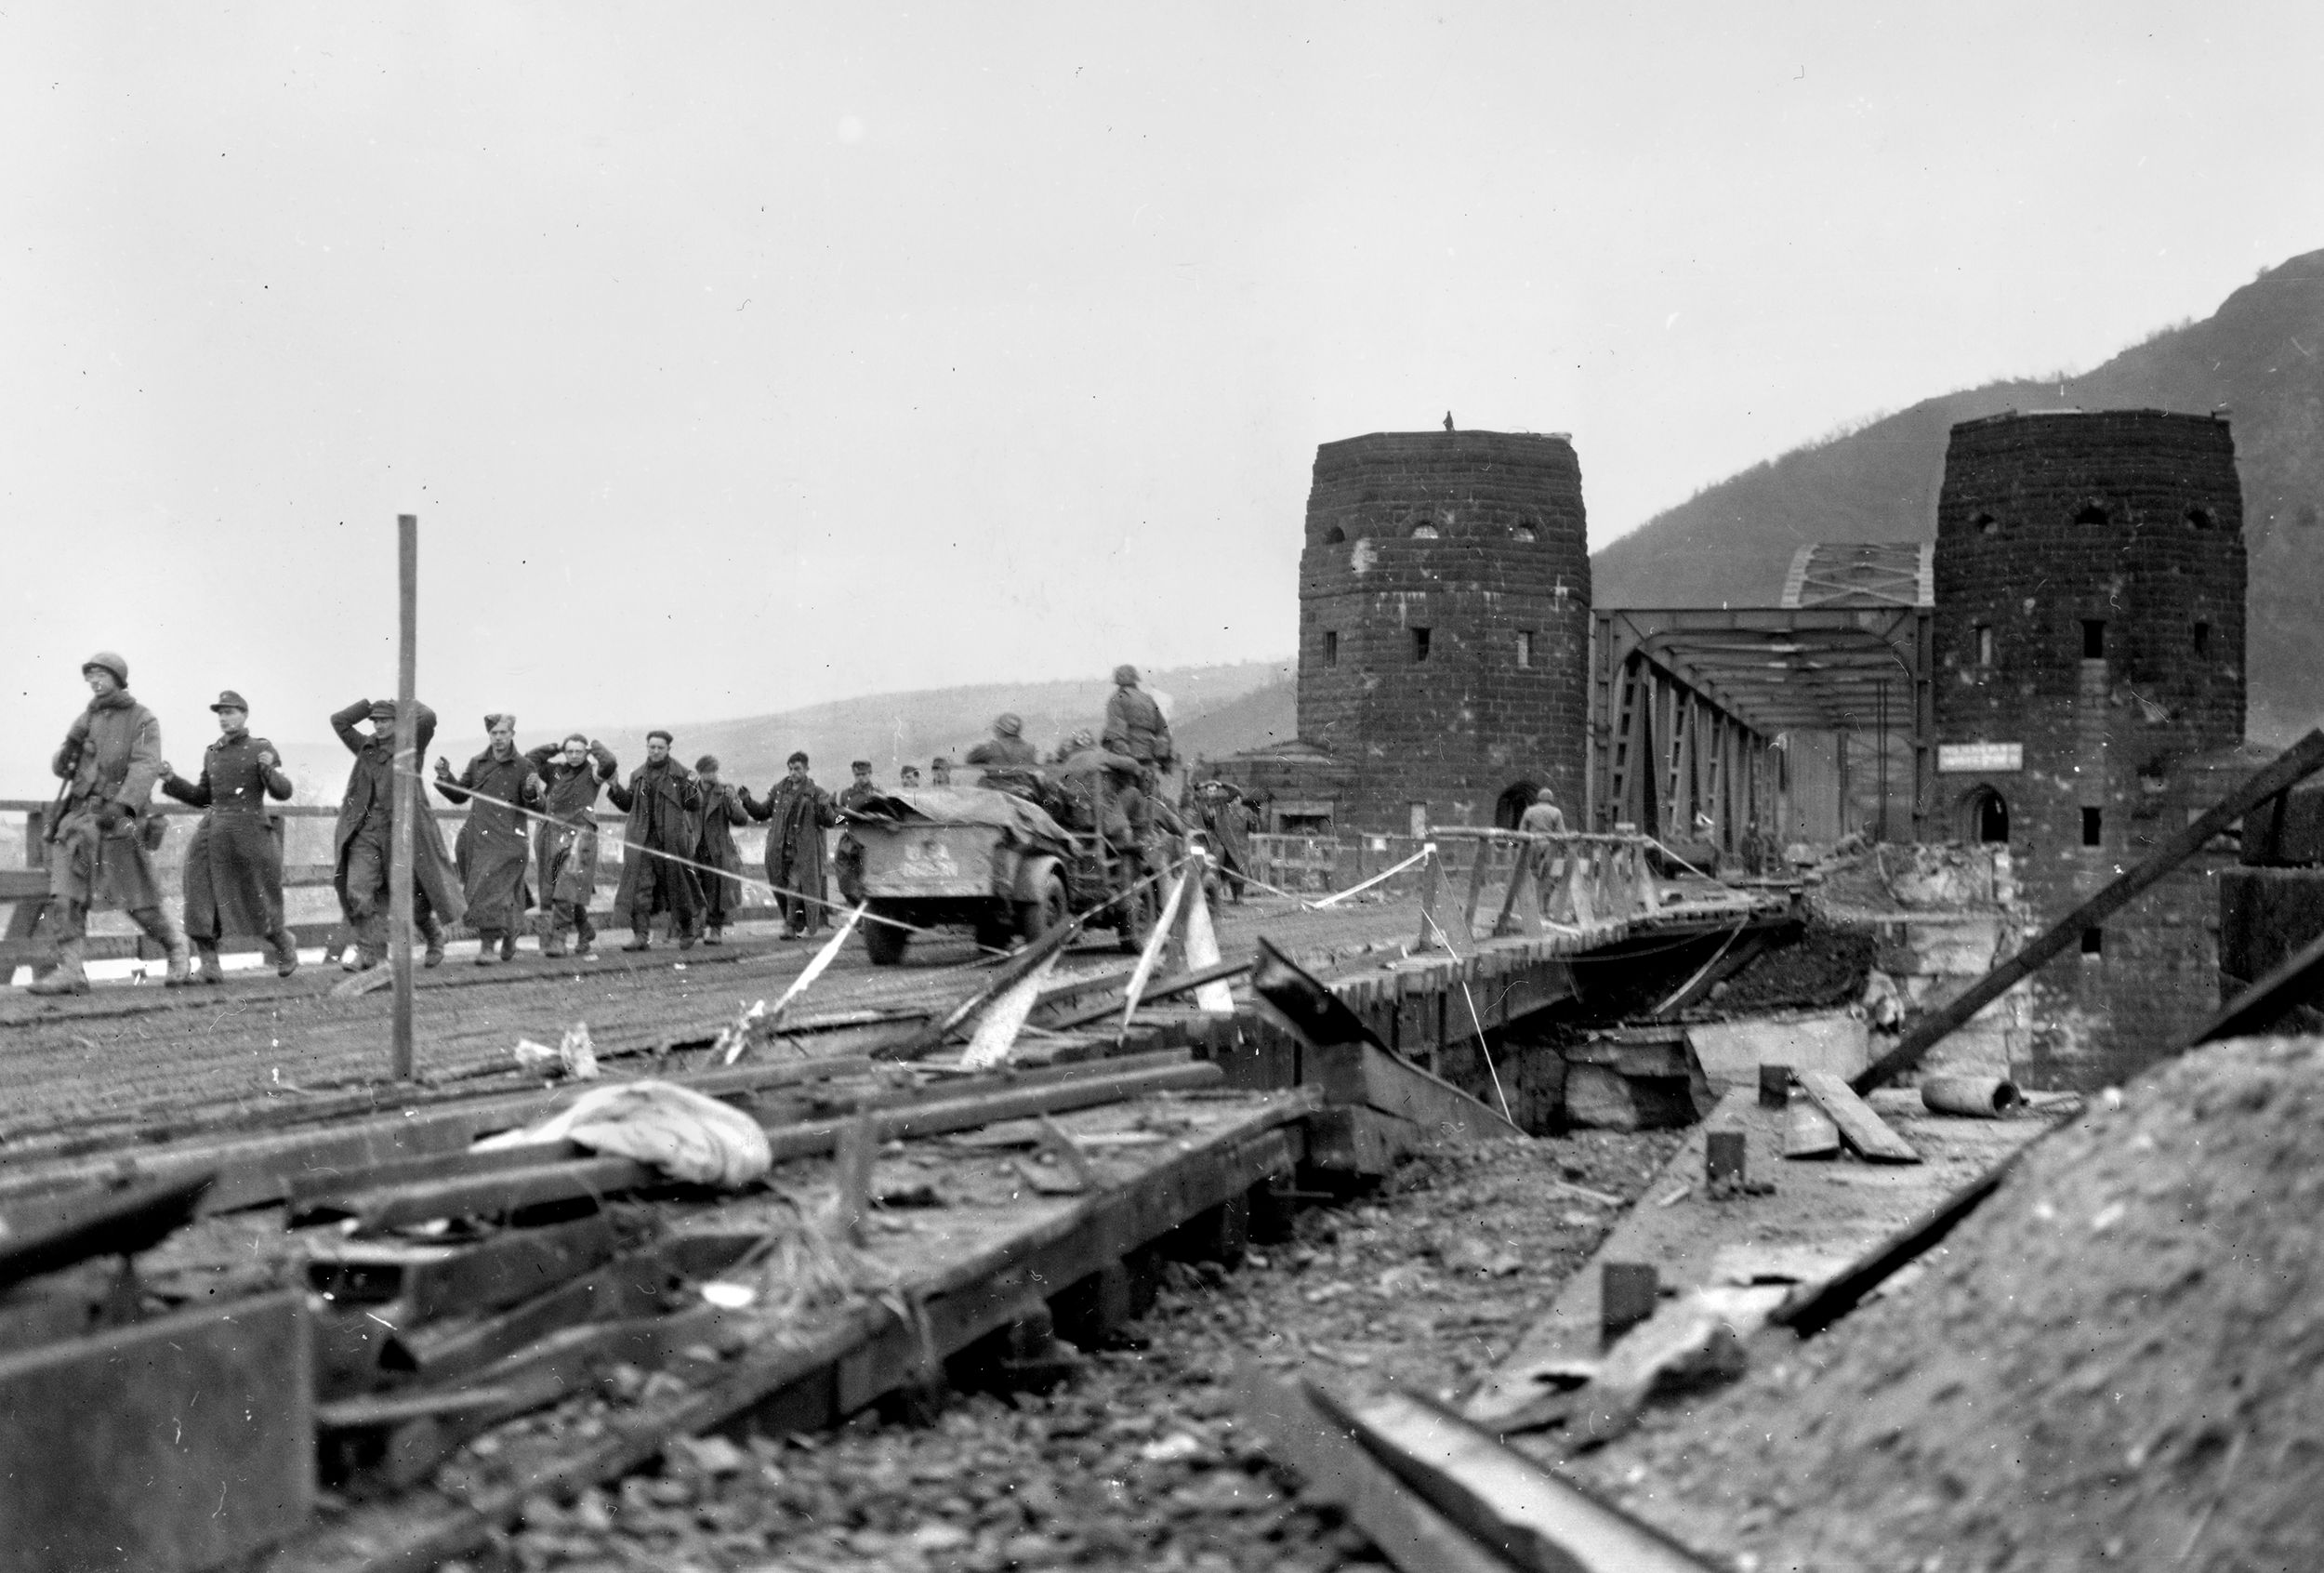 German POWs file across to the western end of the Ludendorff Bridge shortly after capture. German soldiers and civilians had been hiding deep in the Erpeler Ley railroad tunnel for several hours before surrendering.